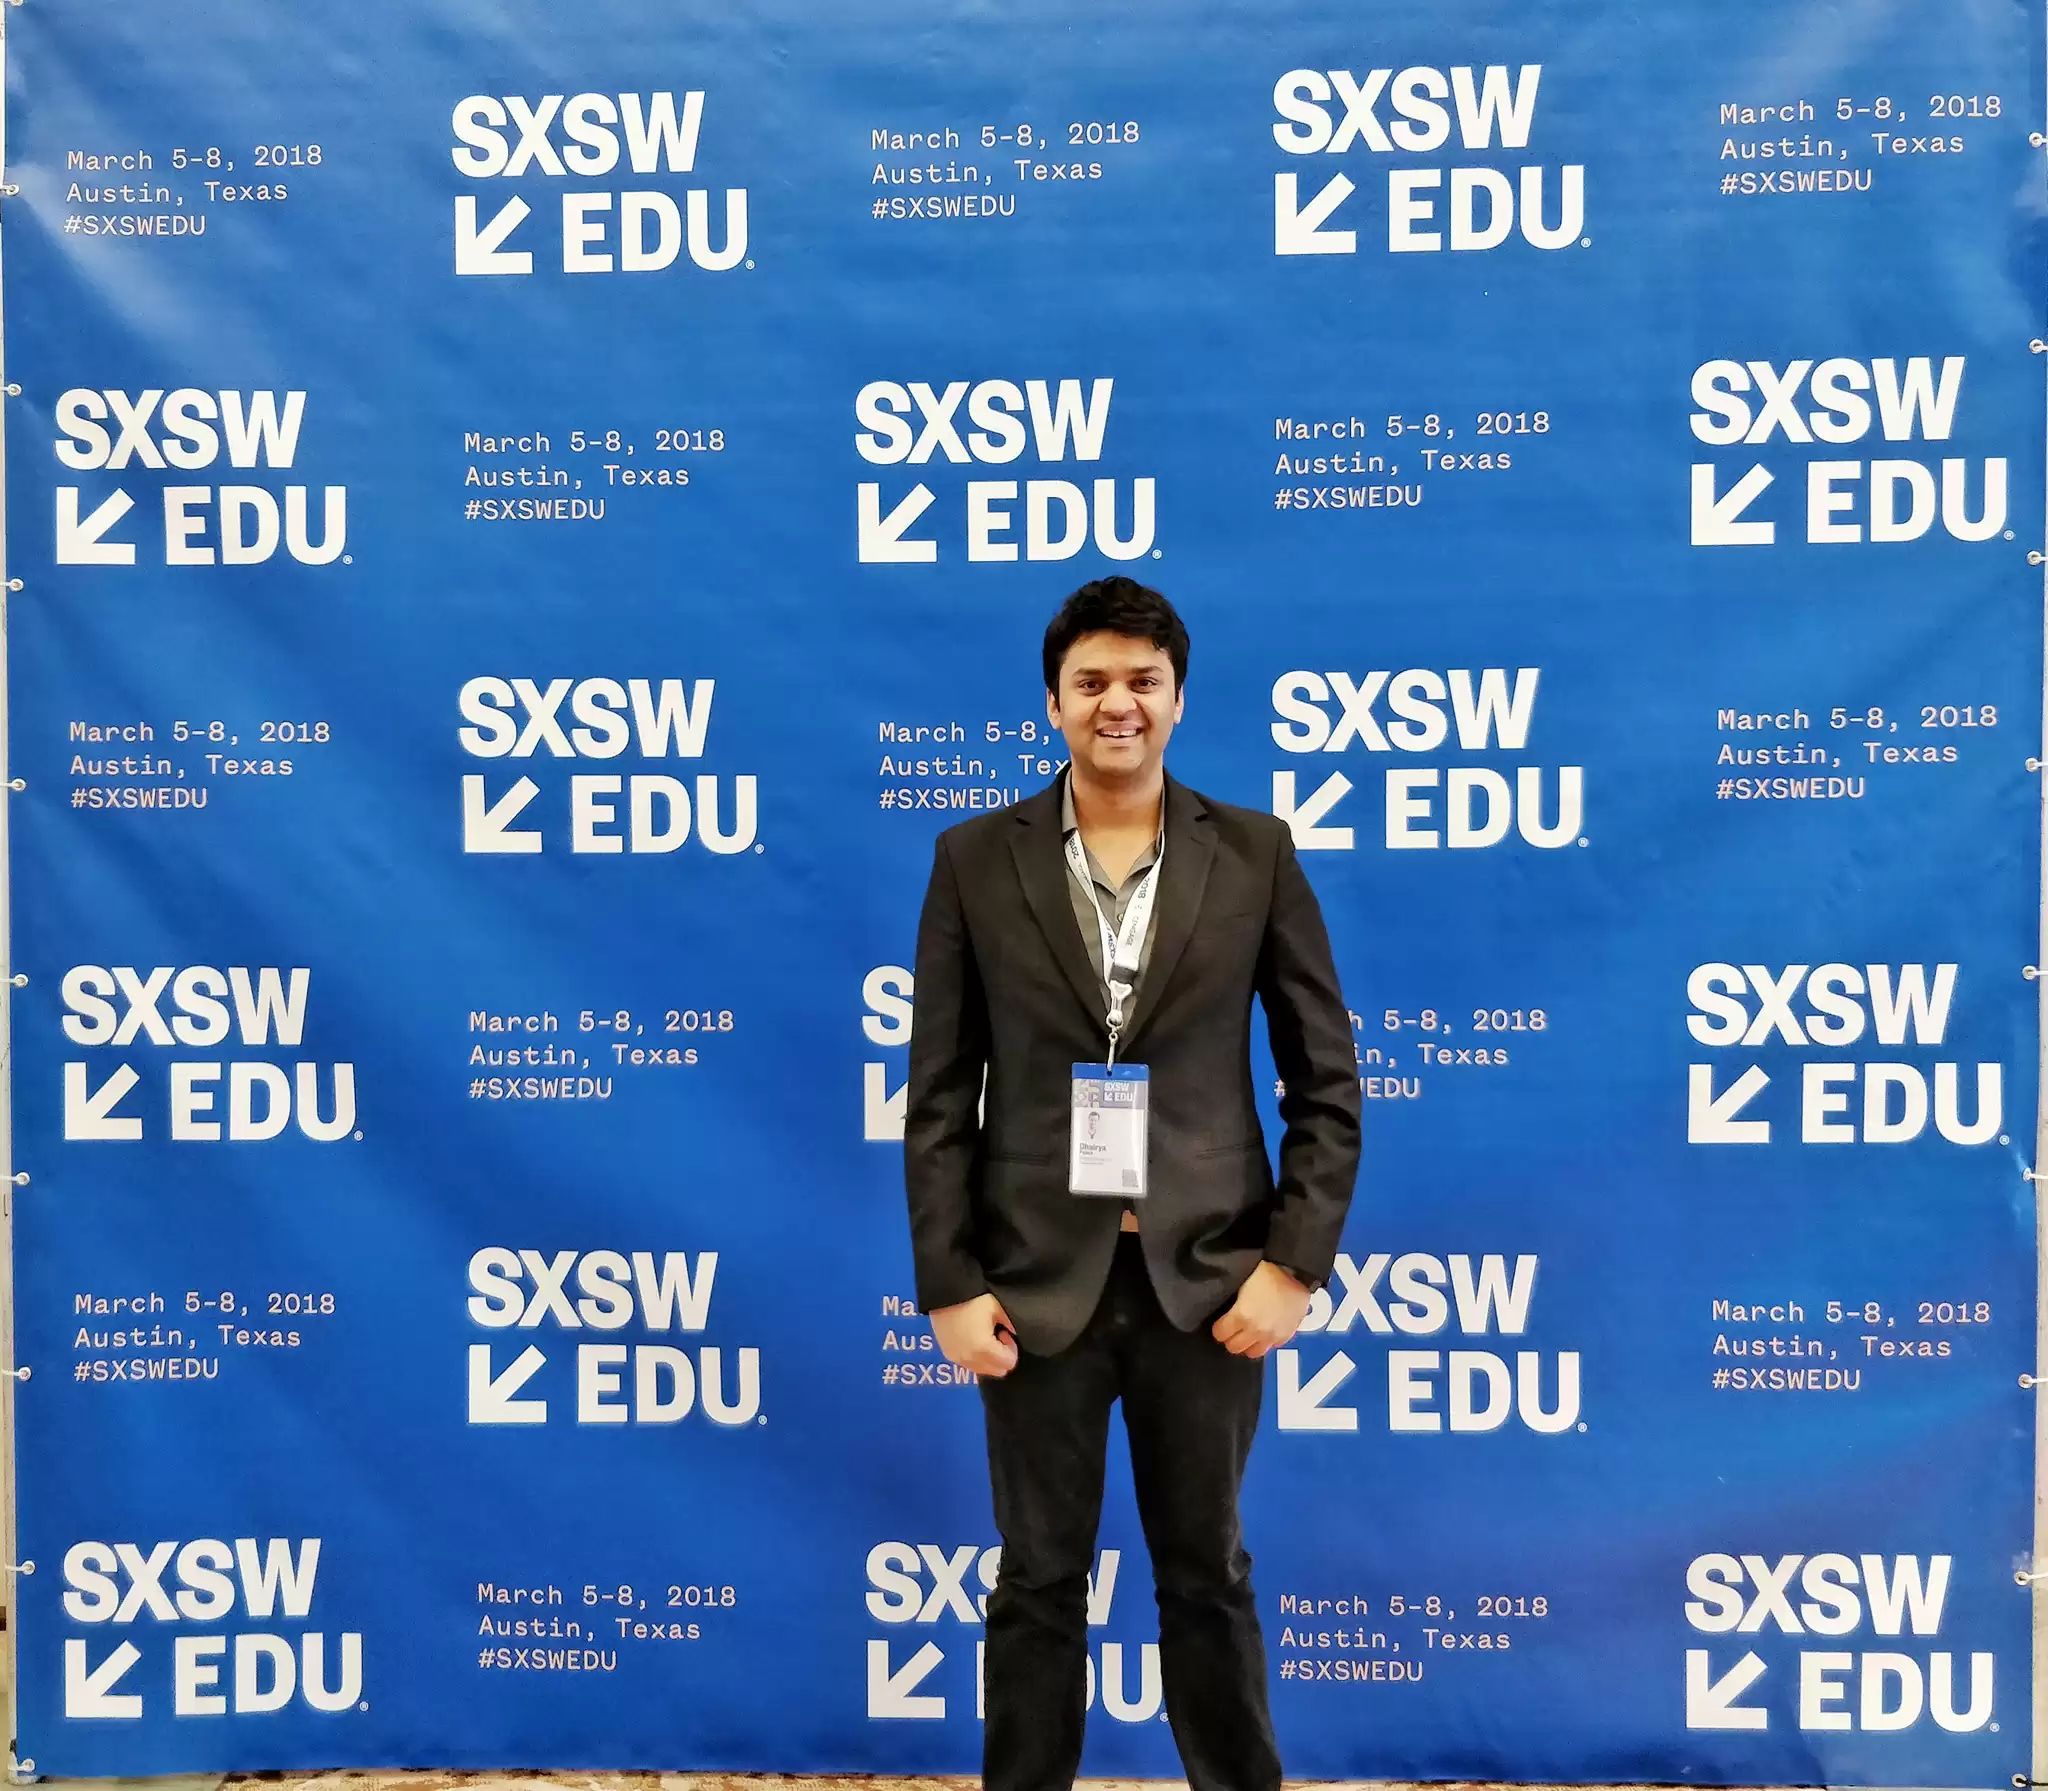 On stage at SXSW 2018 for Education stream. What a brilliant experience!